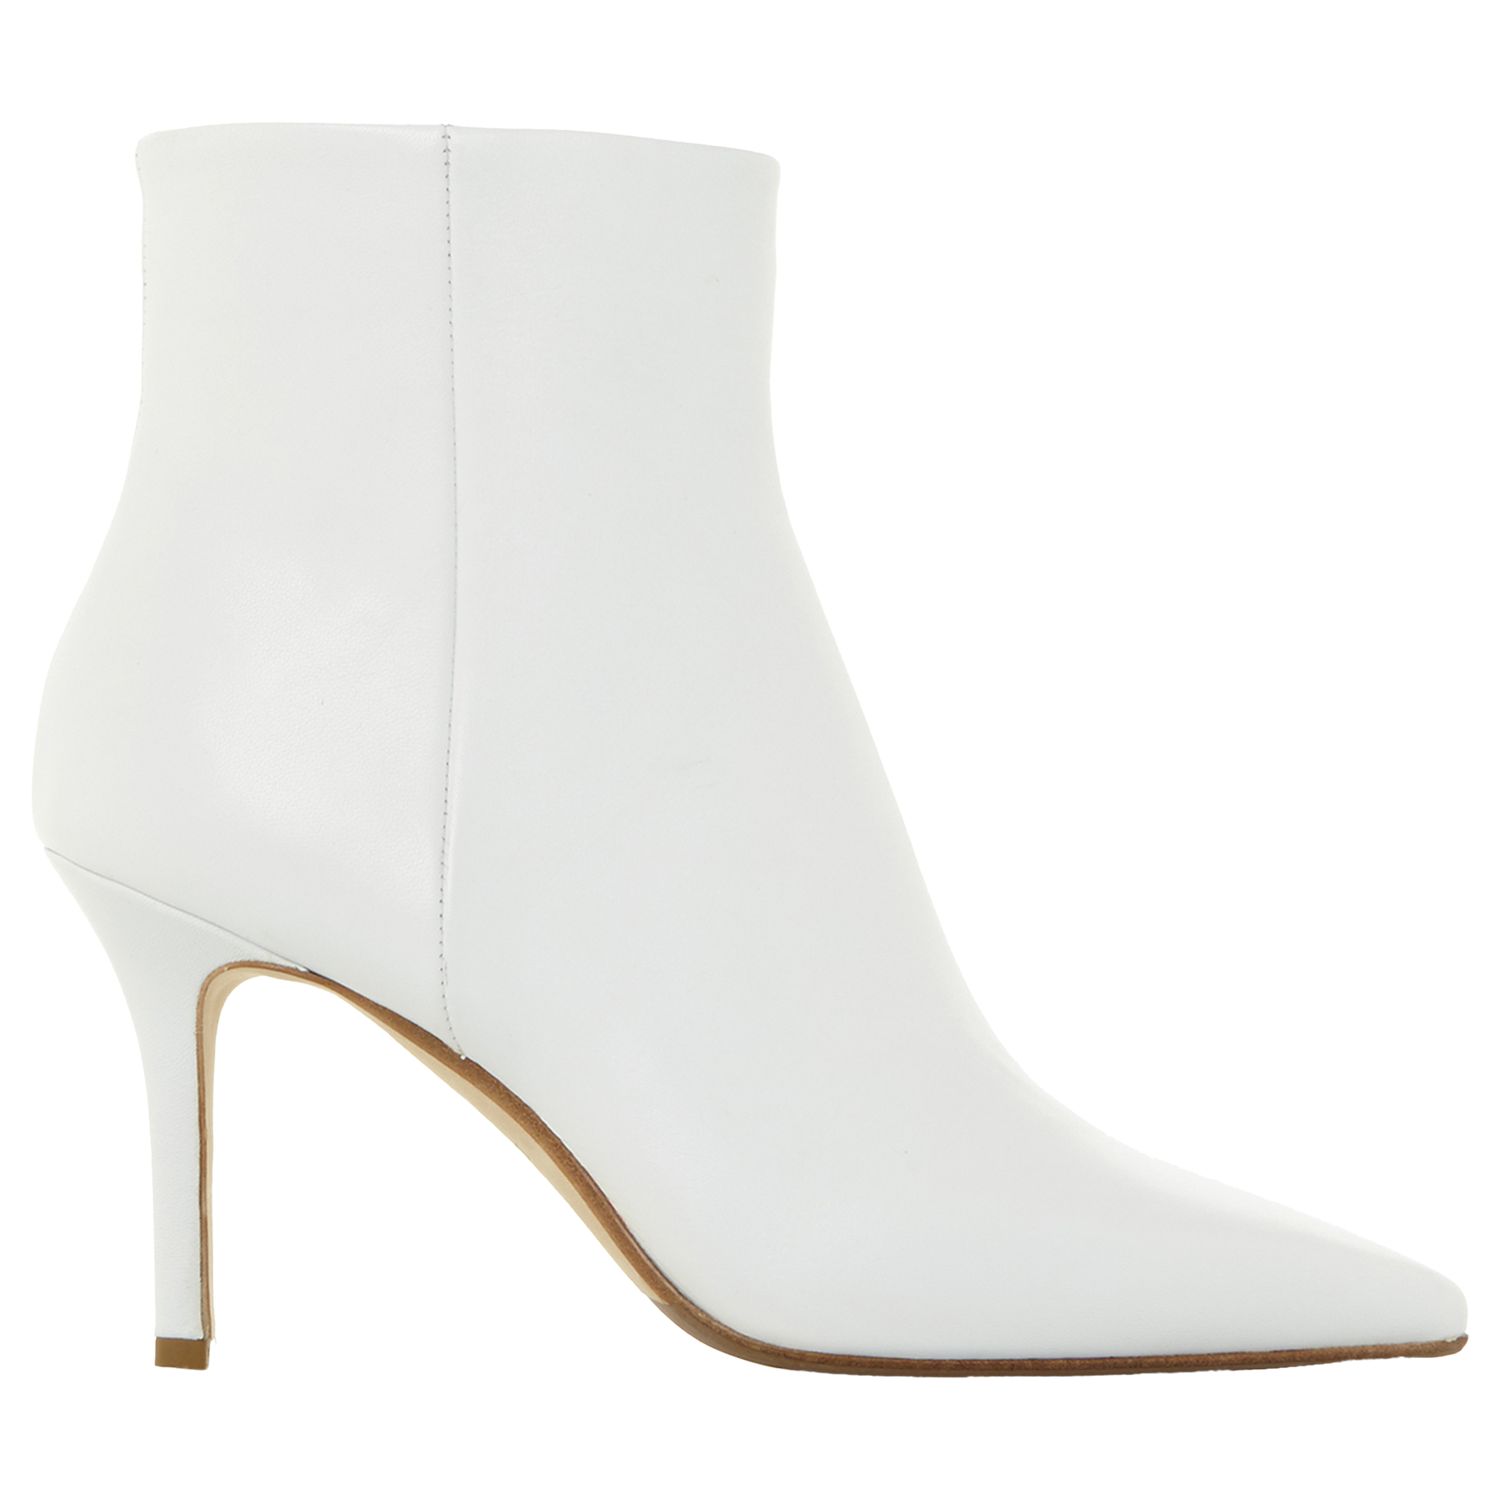 Dune Black O'Connor Stiletto Heel Ankle Boots, White Leather